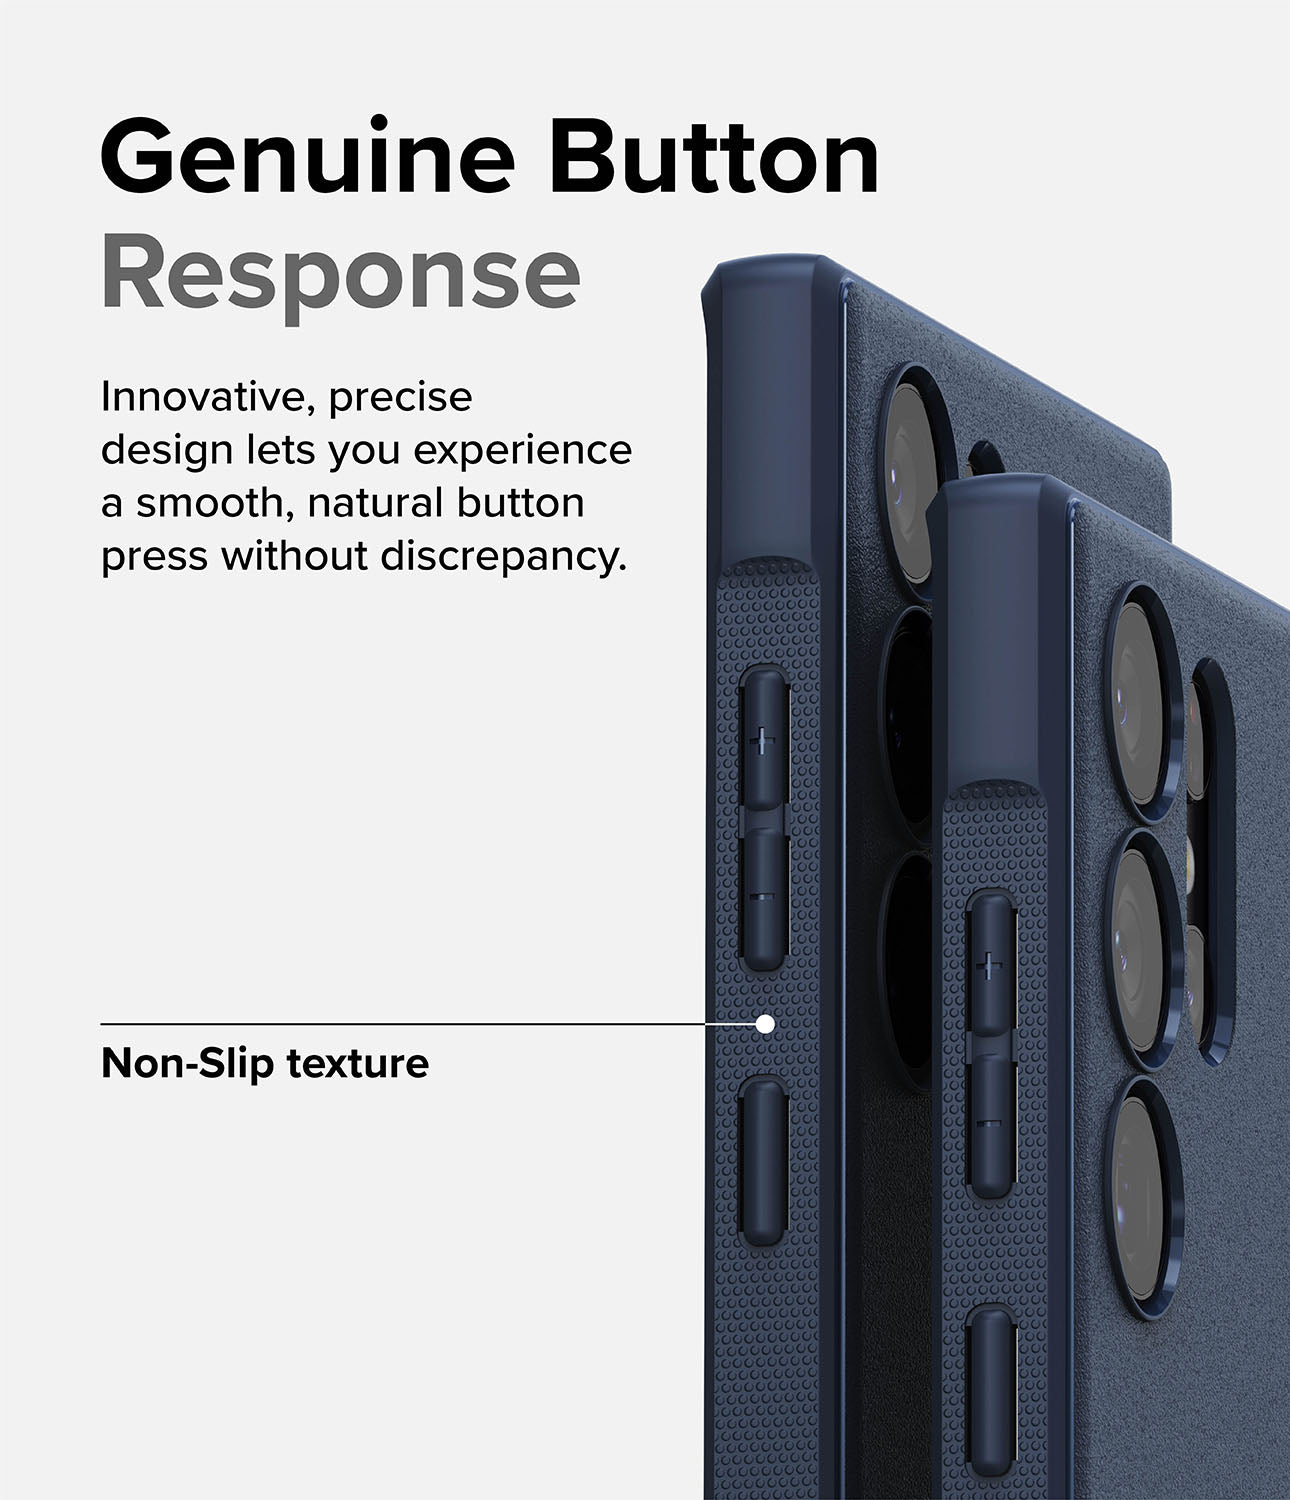 Galaxy S23 Ultra Case | Onyx - Navy - Genuine Button Response. Innovative, precise design lets you experience a smooth, natural button press without discrepancy. Non-Slip texture.